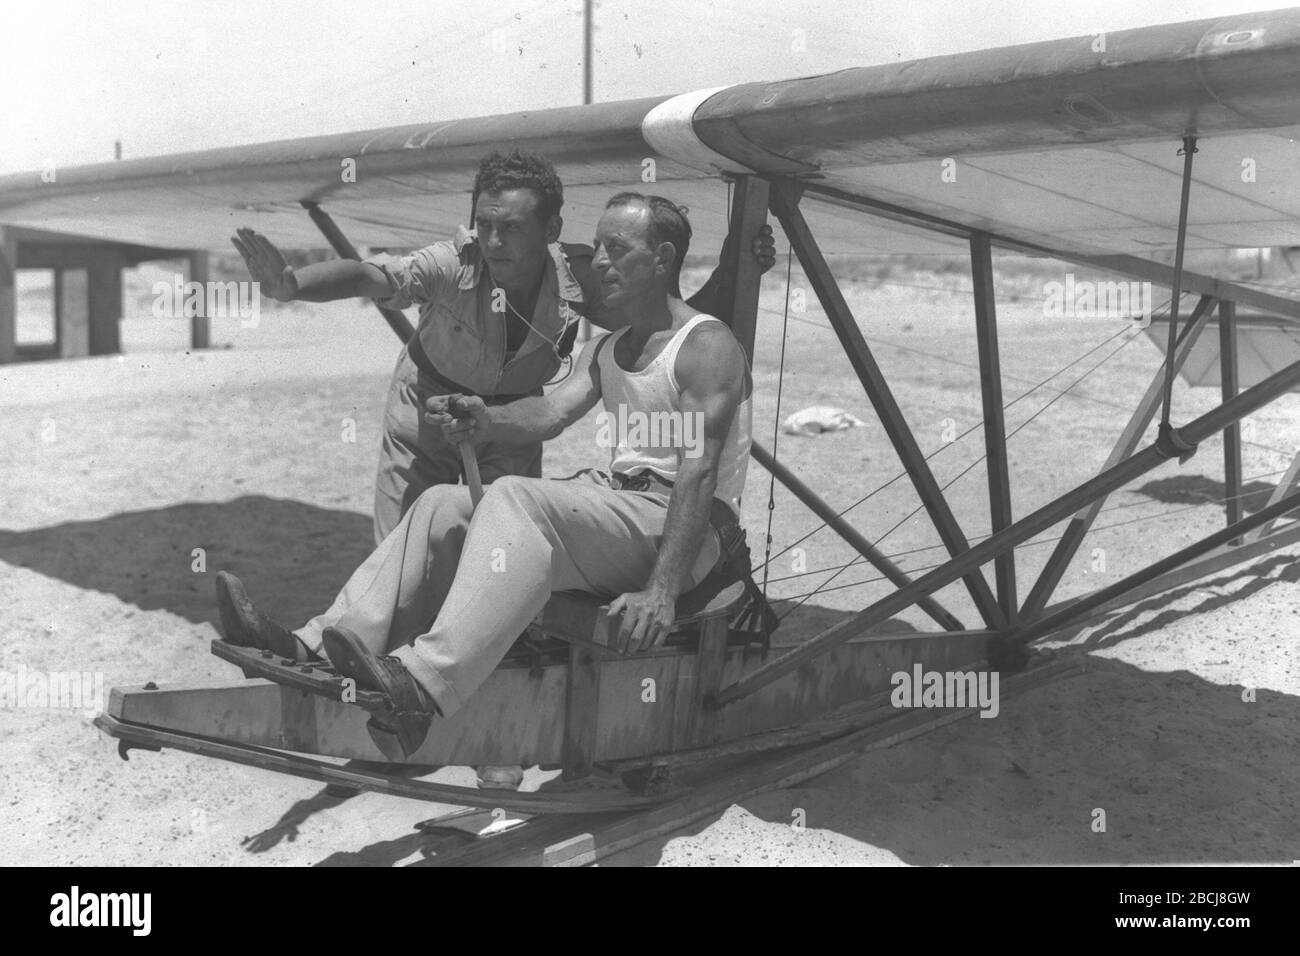 English Instructor Uri Braier With One Of The Members Of The Flying Camel Gliding Club During Training Near Bat Yam O E O U I I I U I I U U I U I O O U U E O E O U I U E I E I U O I